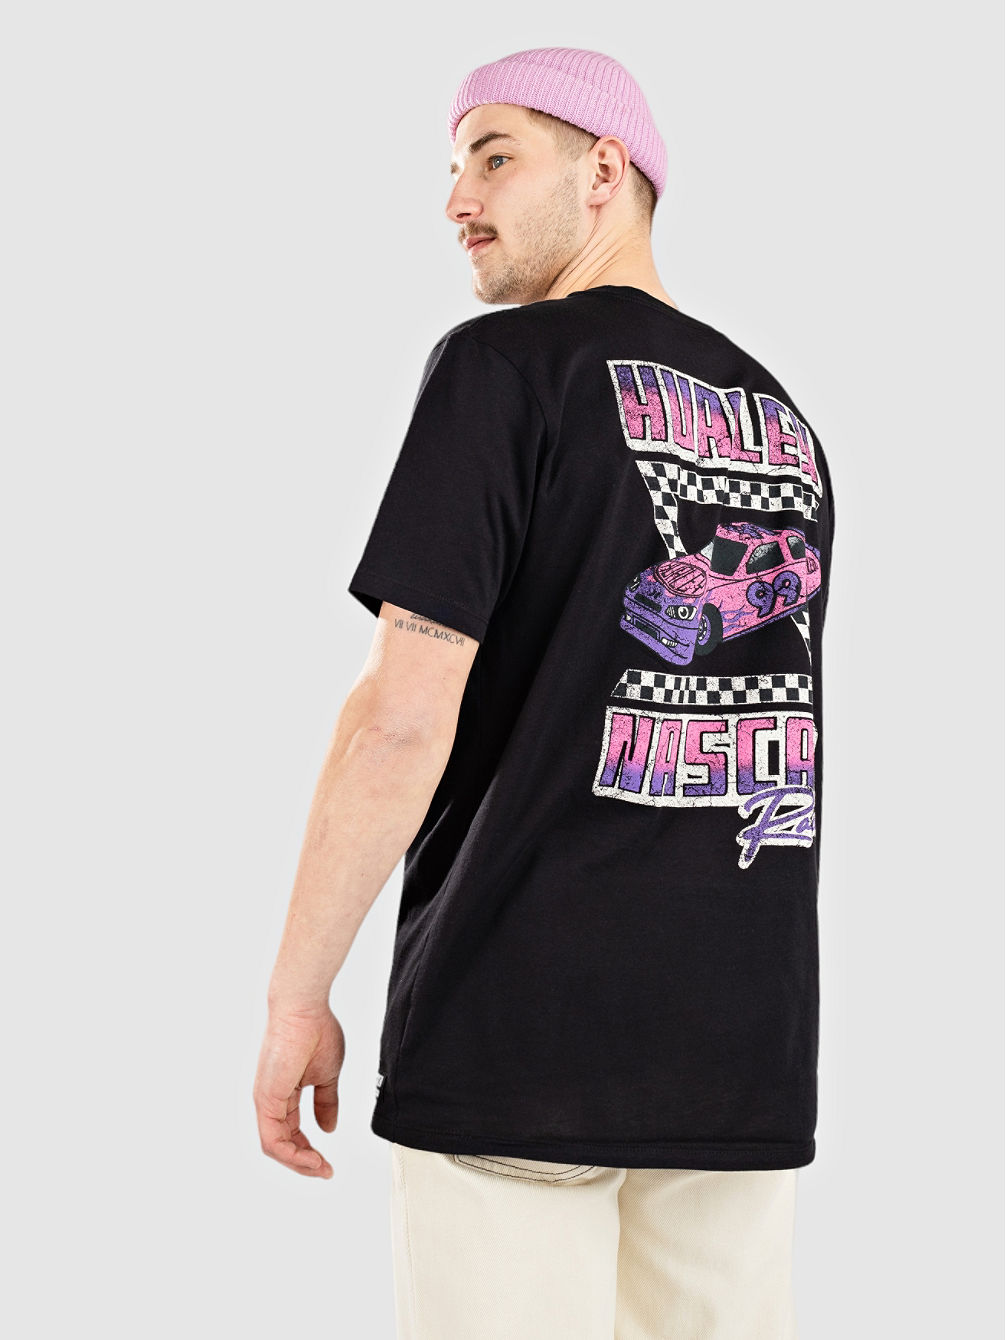 Nascar Everyday Faster T-Shirt